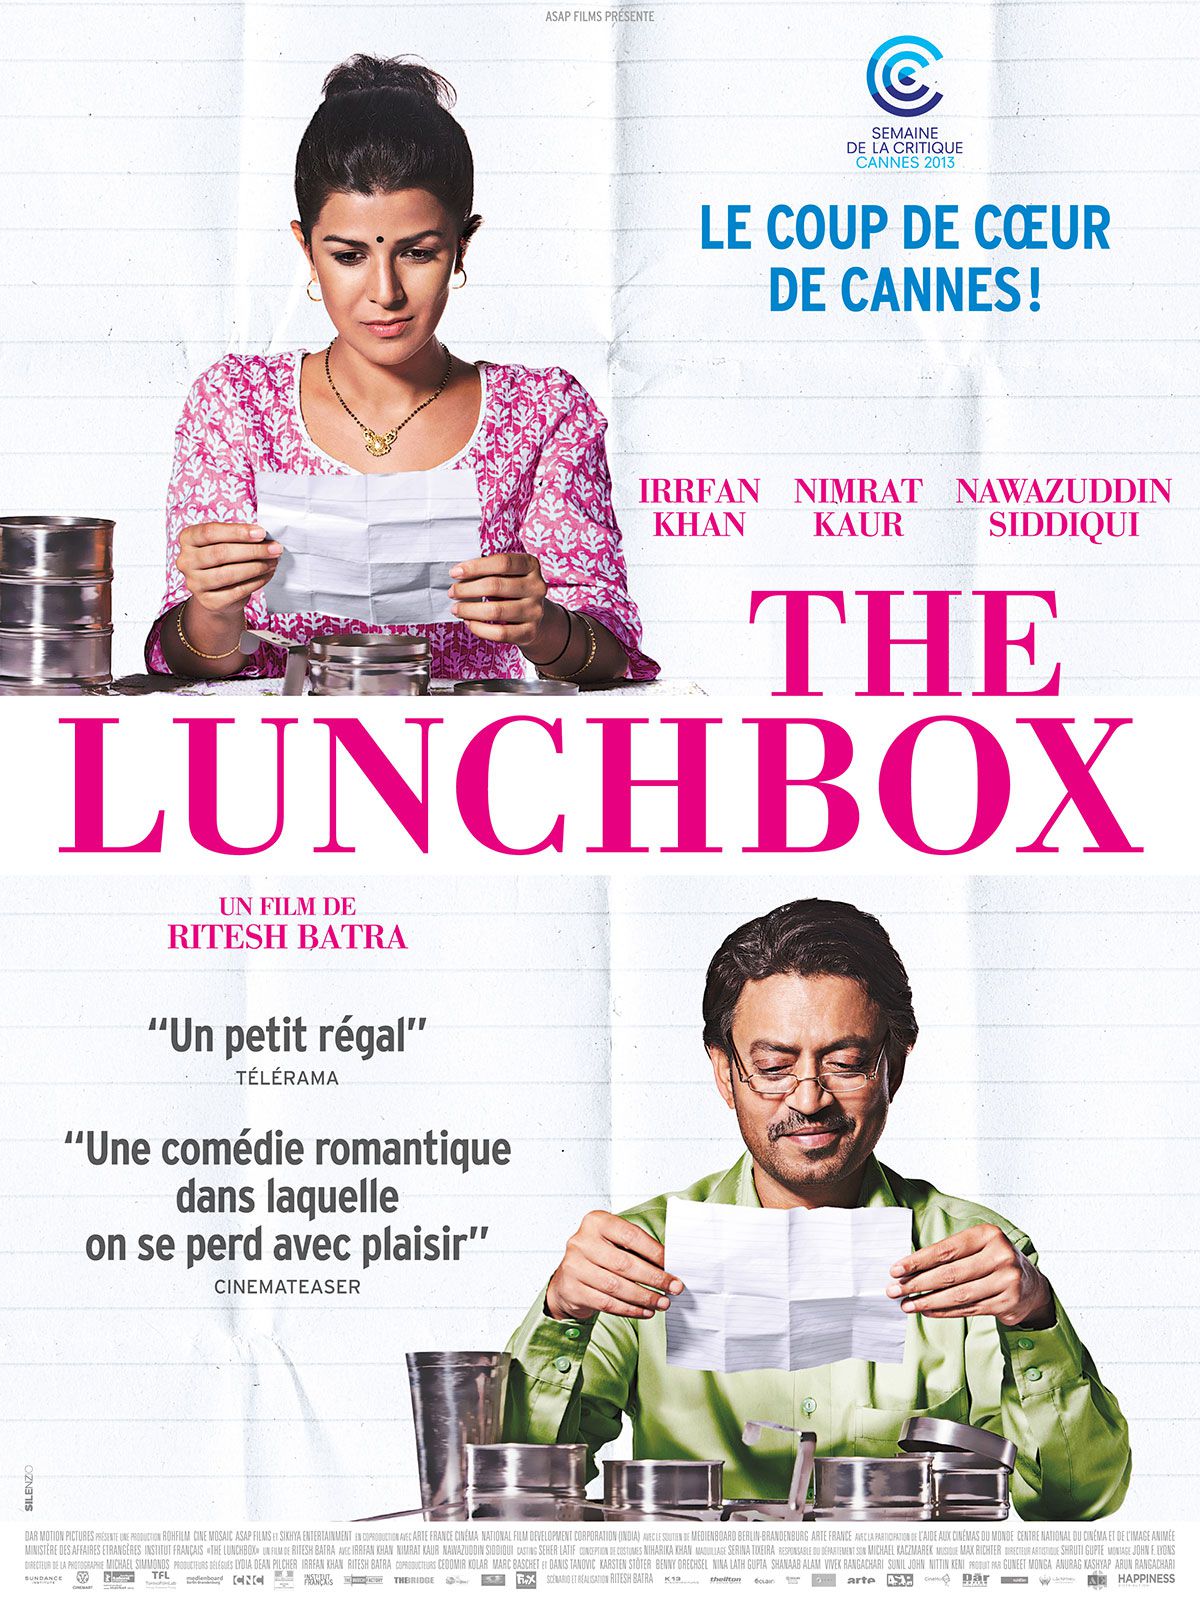 The Lunchbox - Film (2013) streaming VF gratuit complet